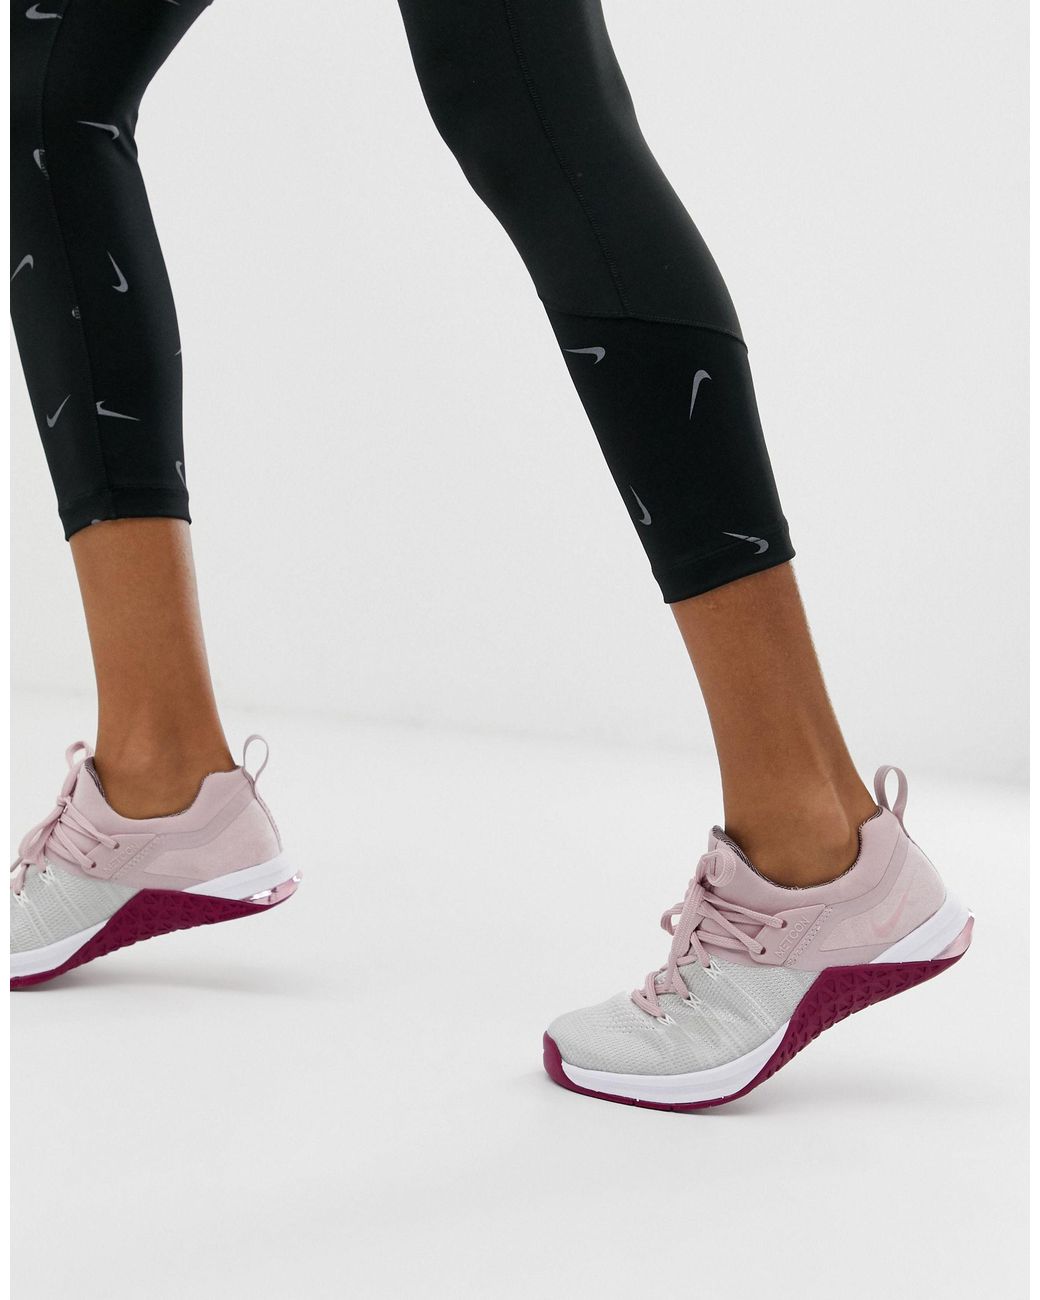 La nuestra Implacable referencia Nike Nike Metcon Flyknit 3 in Pink | Lyst Australia